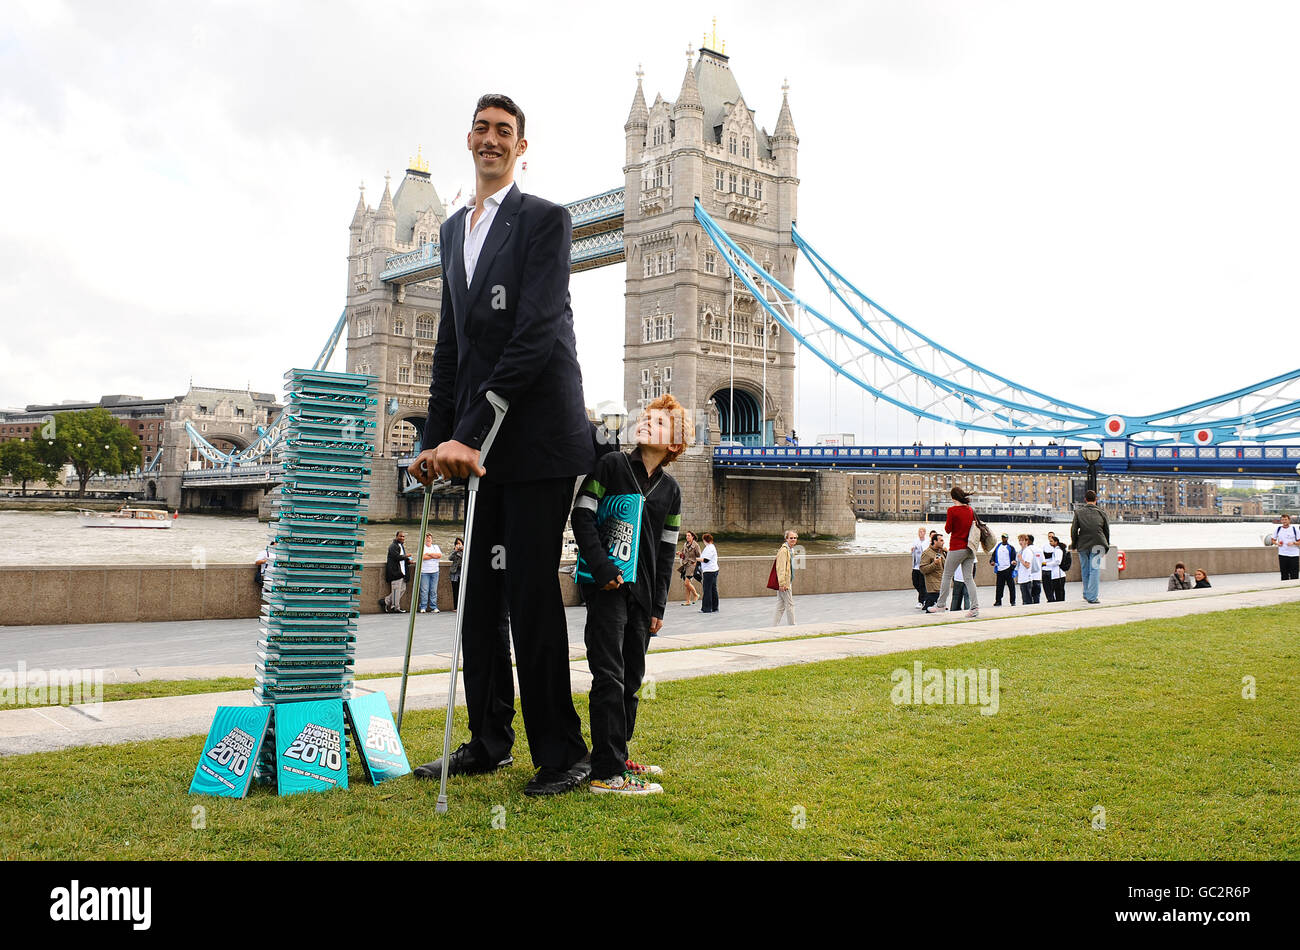 Sultan Kosen, from Turkey, stands next to Josh Henderson, from West Horsley, as he is announced as the Guinness World Records Tallest Man standing at 8ft 1, seen in Potters Field in London. Stock Photo